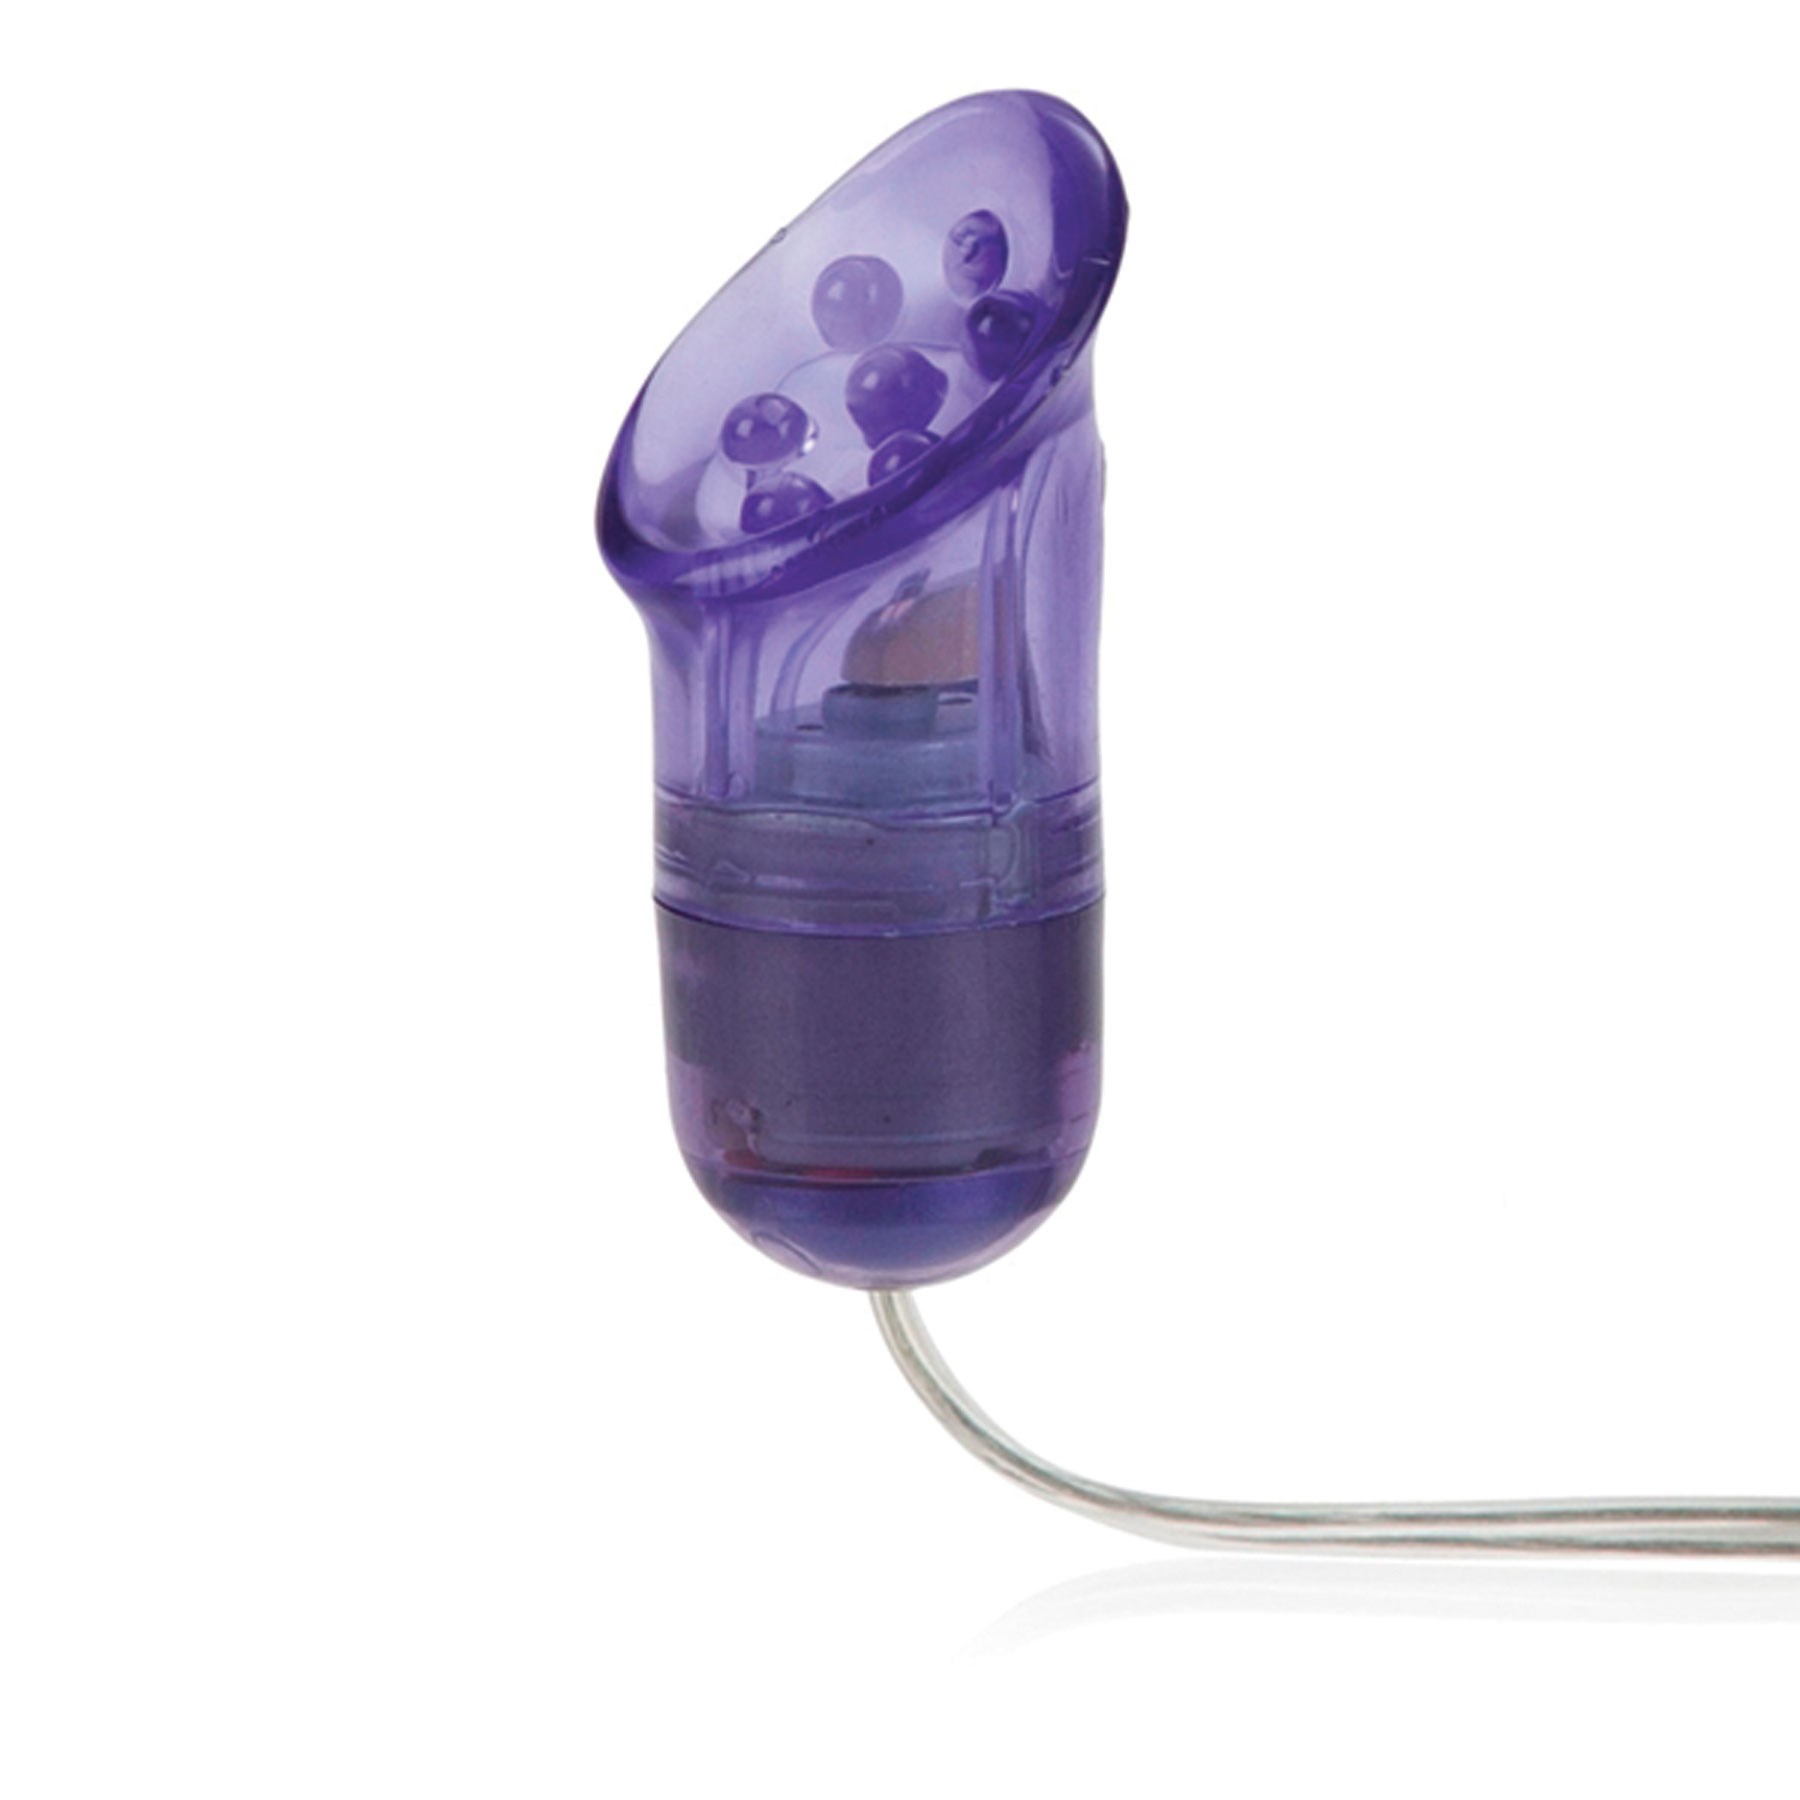 Double Play Vibrator clit cup